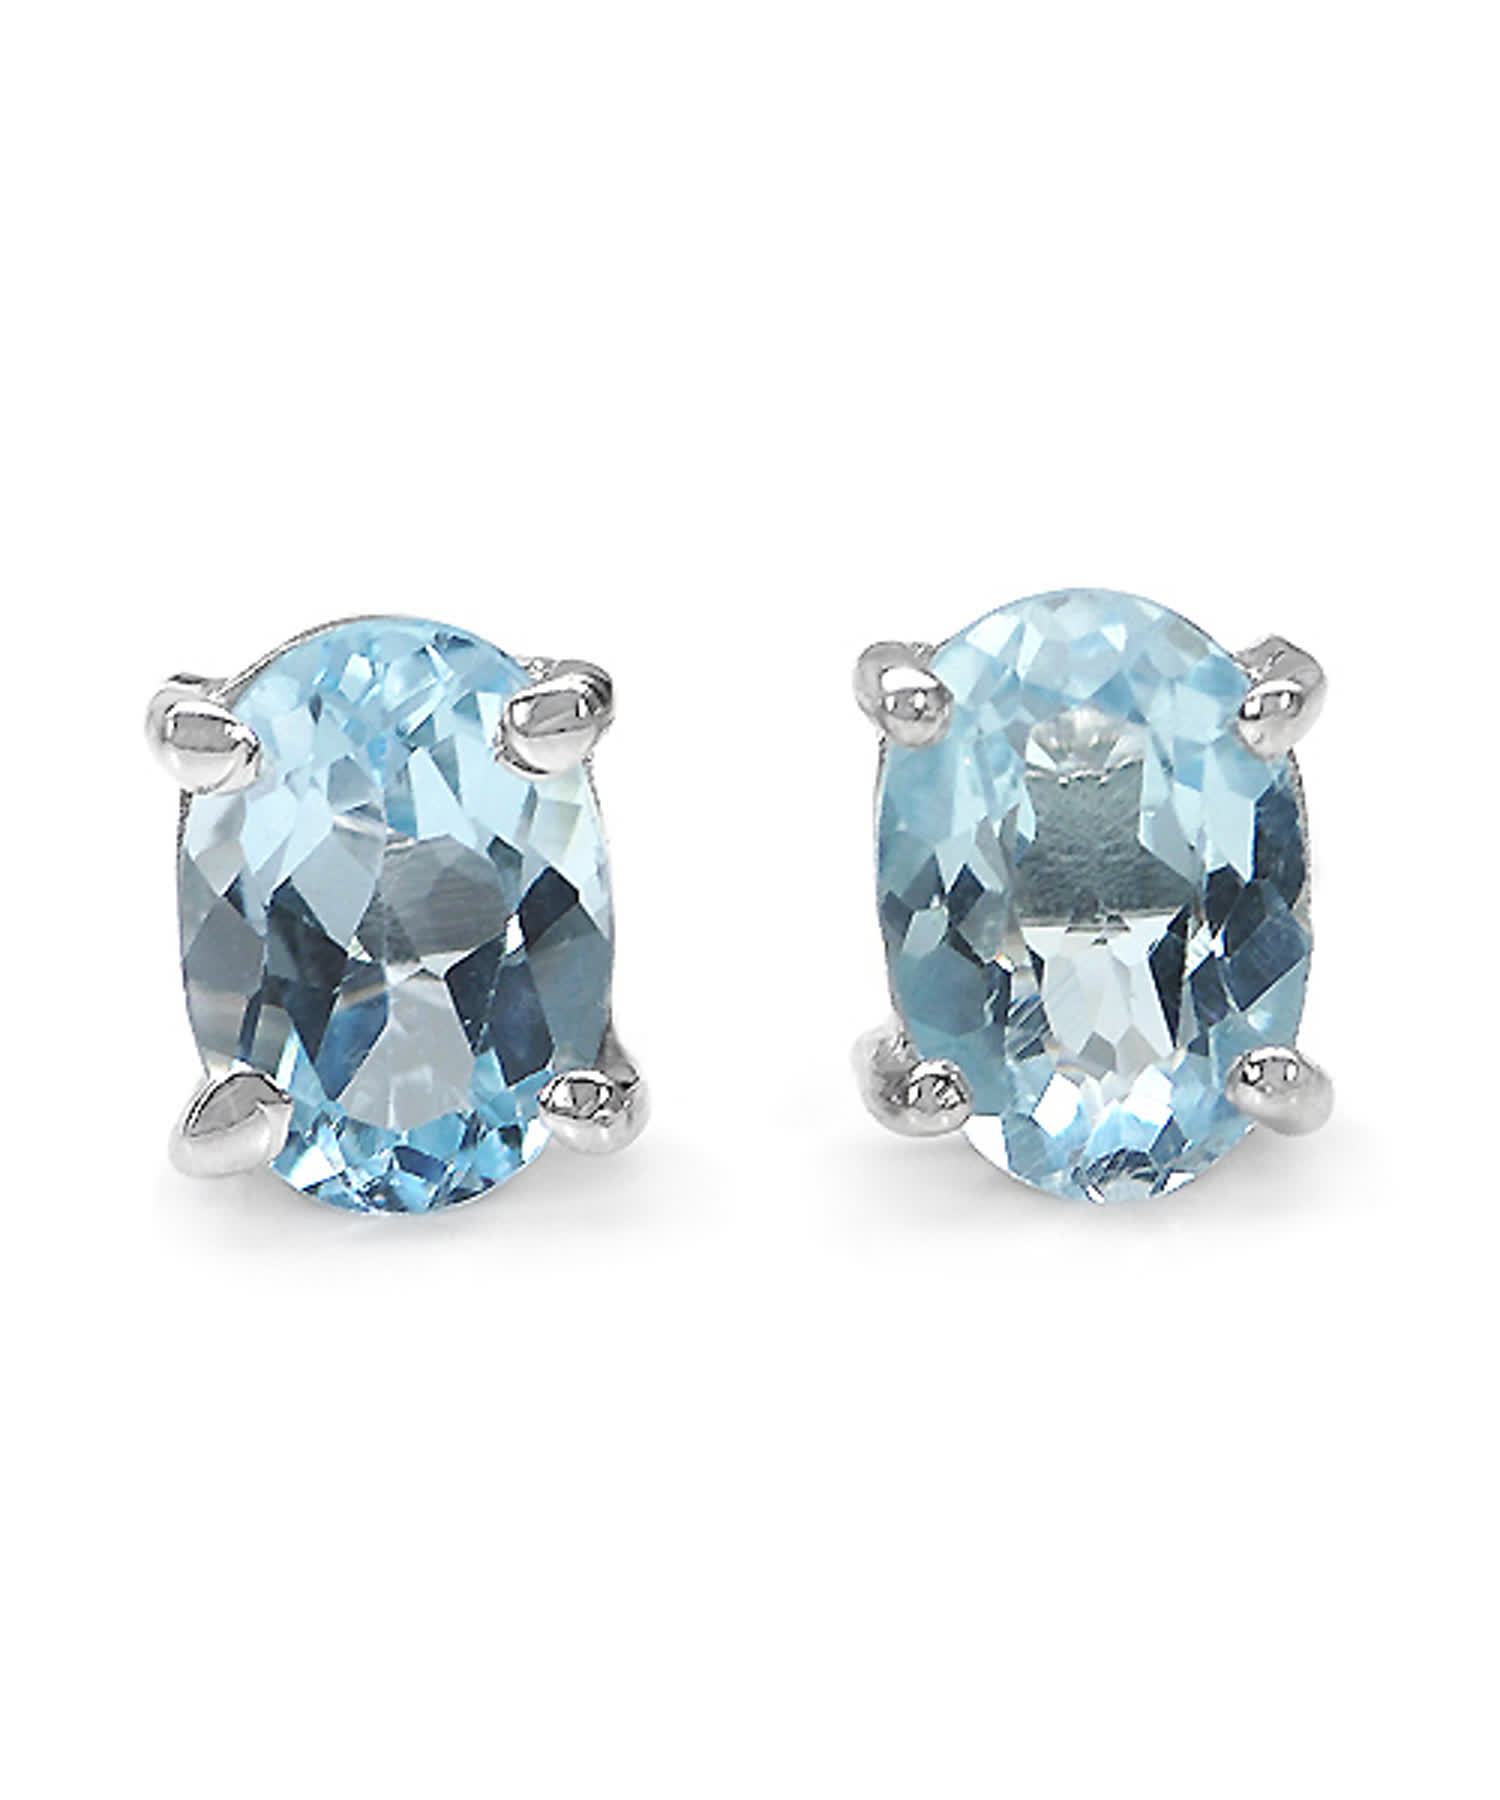 1.90ctw Natural Sky Blue Topaz Rhodium Plated 925 Sterling Silver Stud Earrings View 1